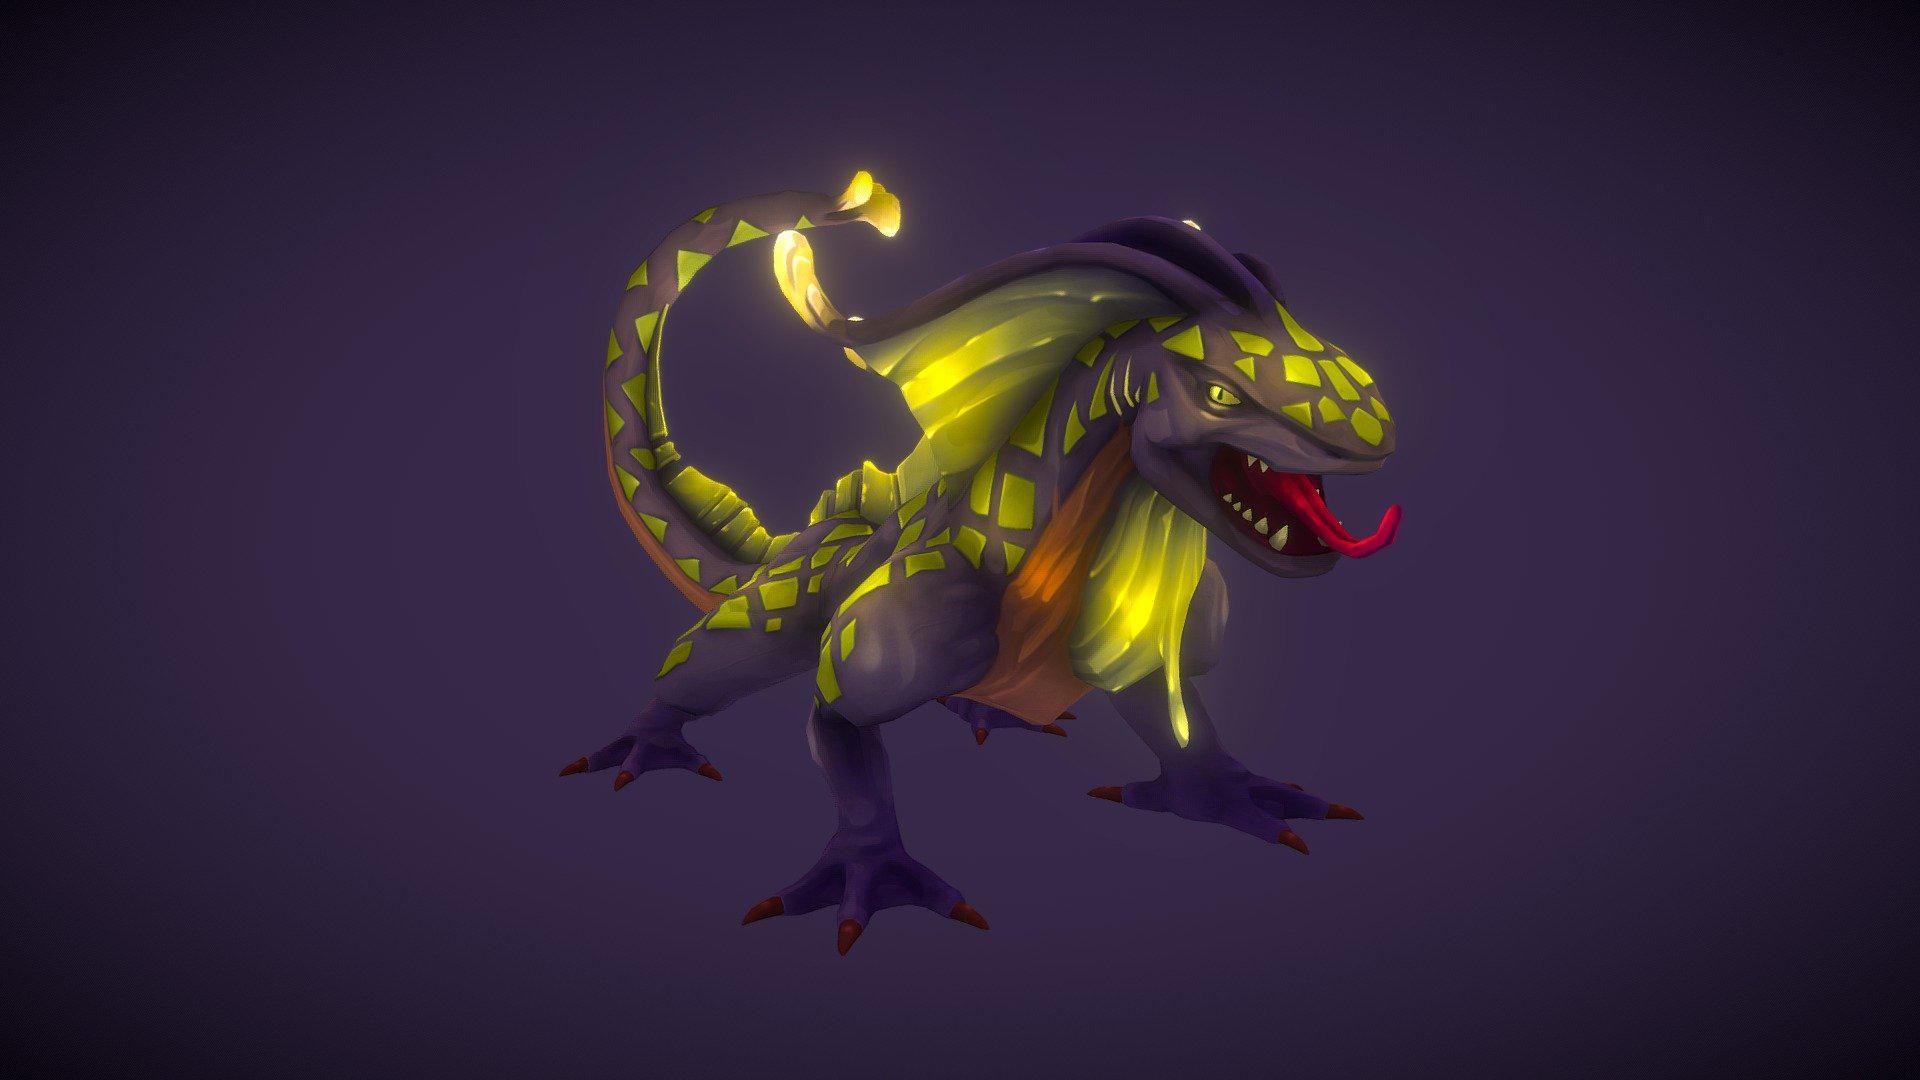 Stylized character for a project.

Software used: Zbrush, Autodesk Maya, Autodesk 3ds Max, Substance Painter - Stylized Fantasy Swamp Gecko - 3D model by N-hance Studio (@Malice6731) 3d model